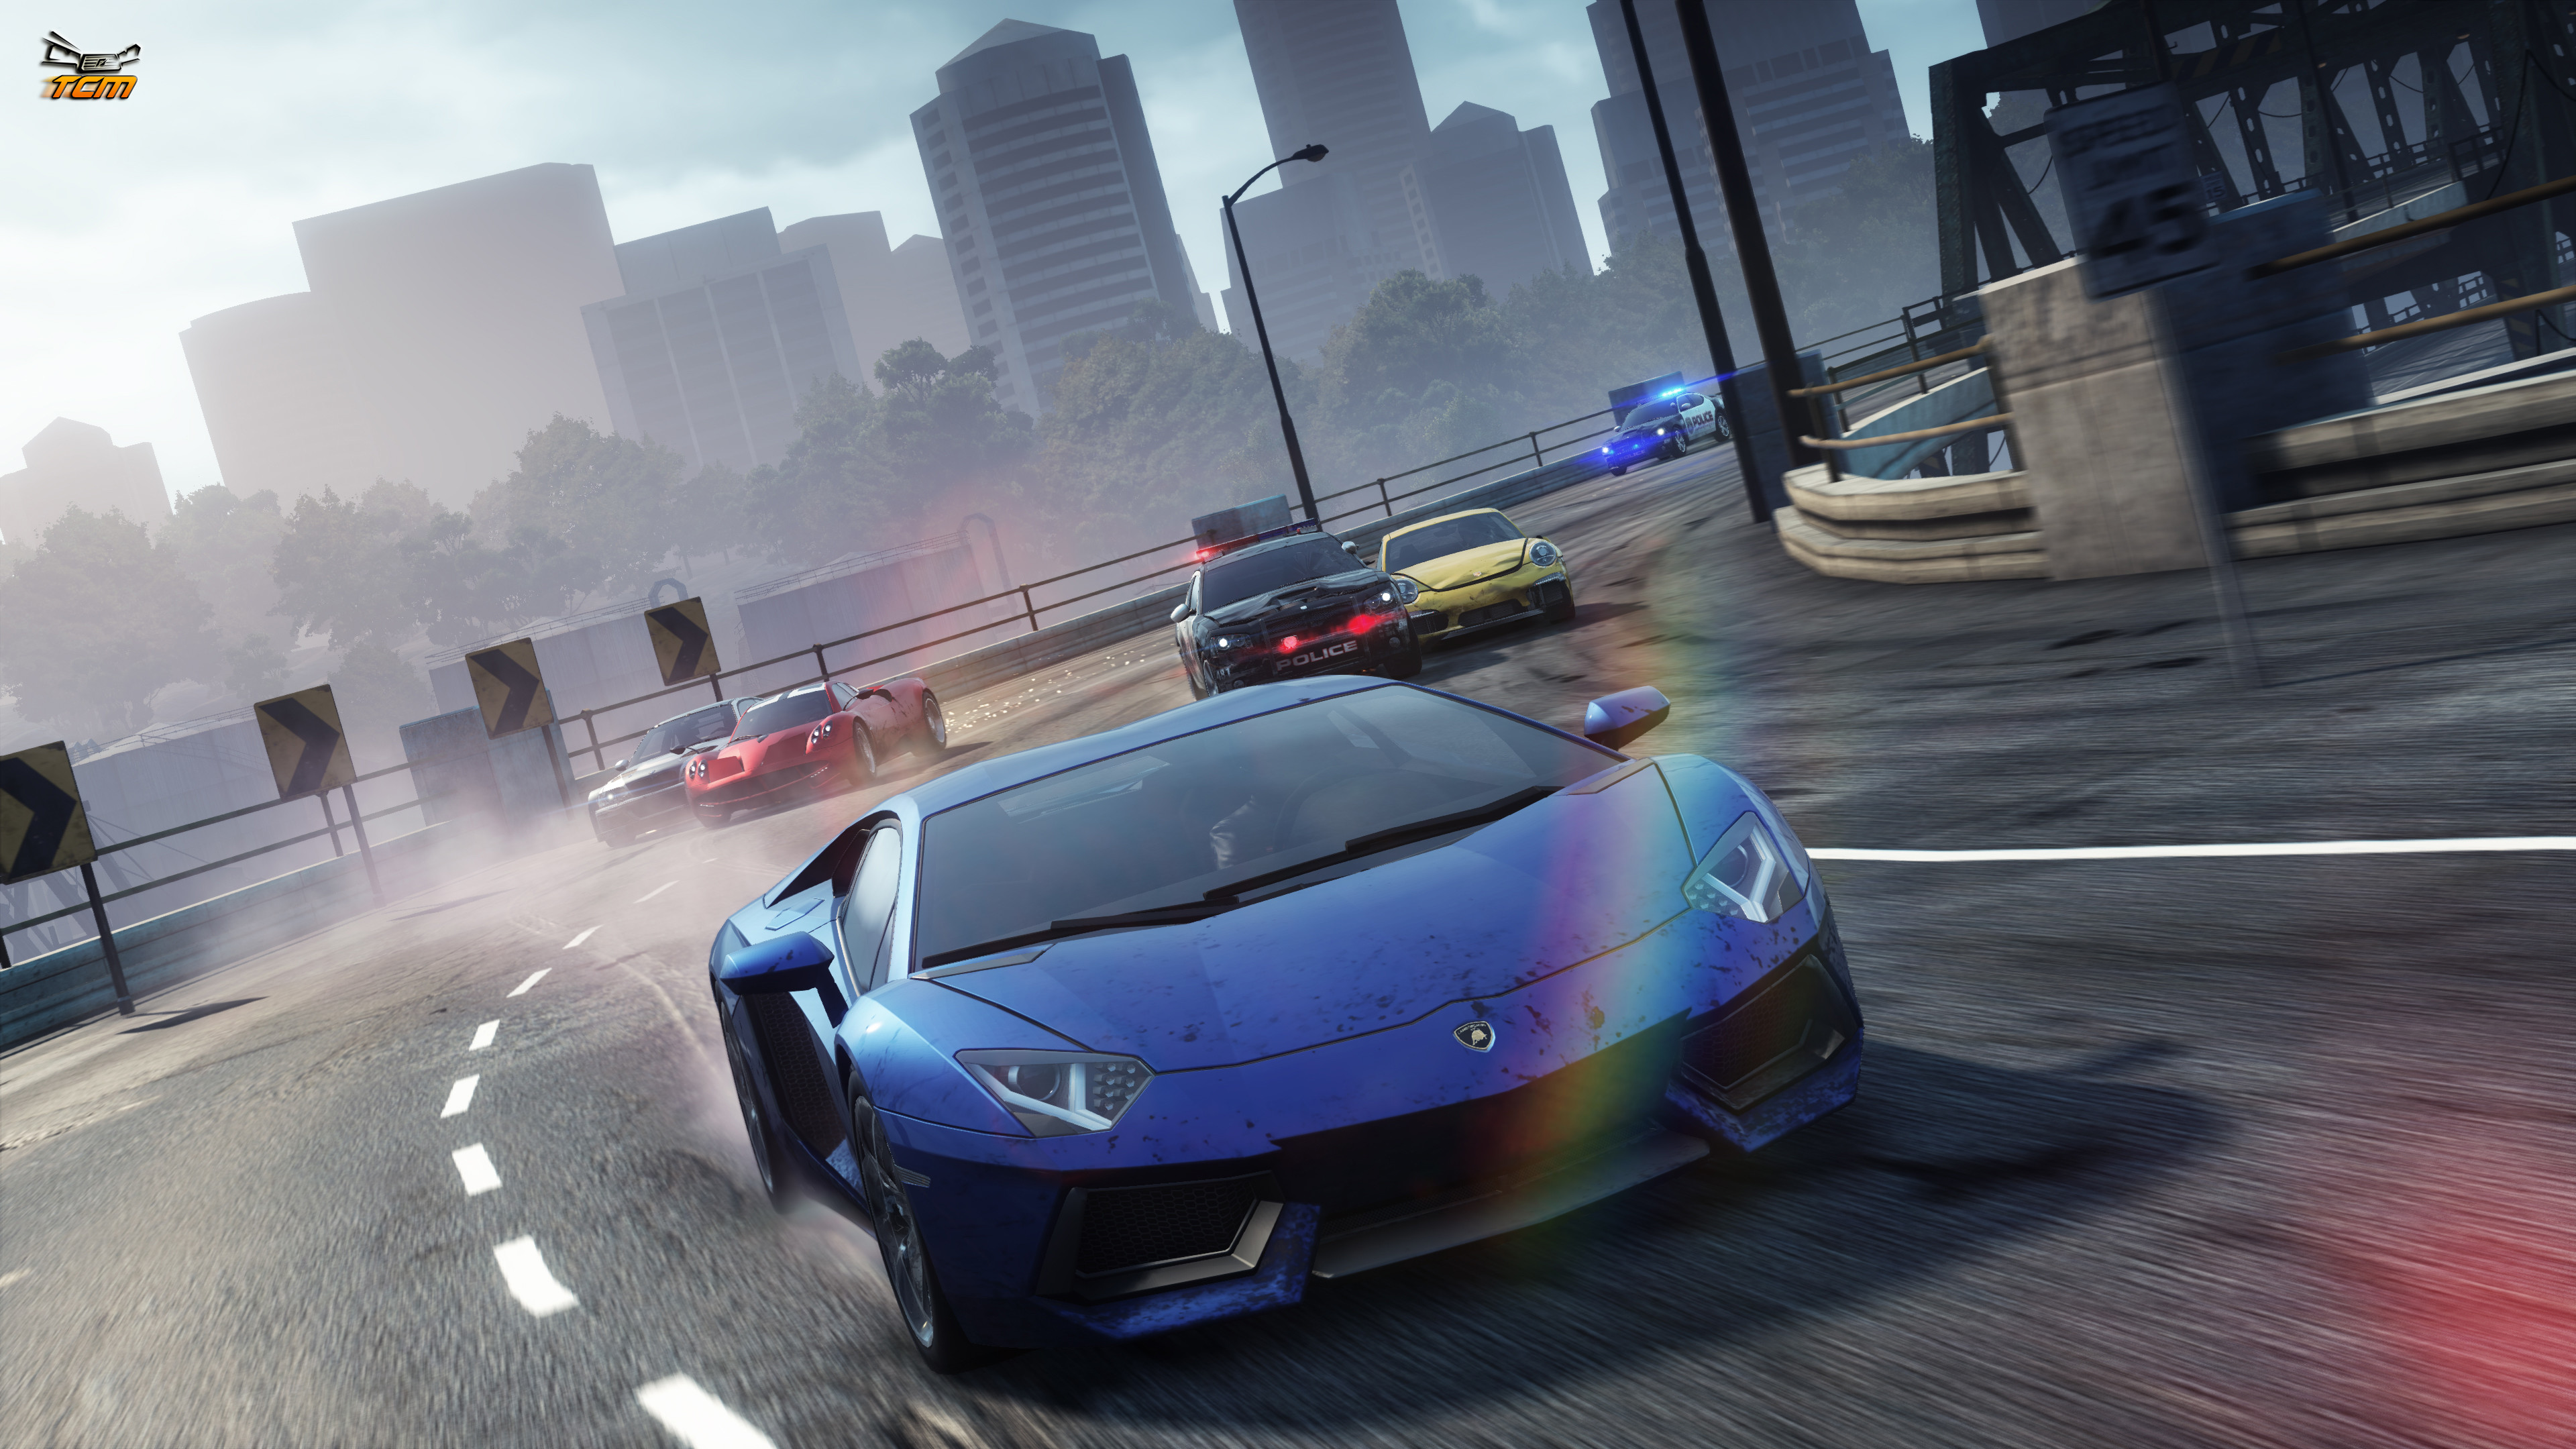 3840x2160 Video Game - Need For Speed: Most Wanted Wallpaper